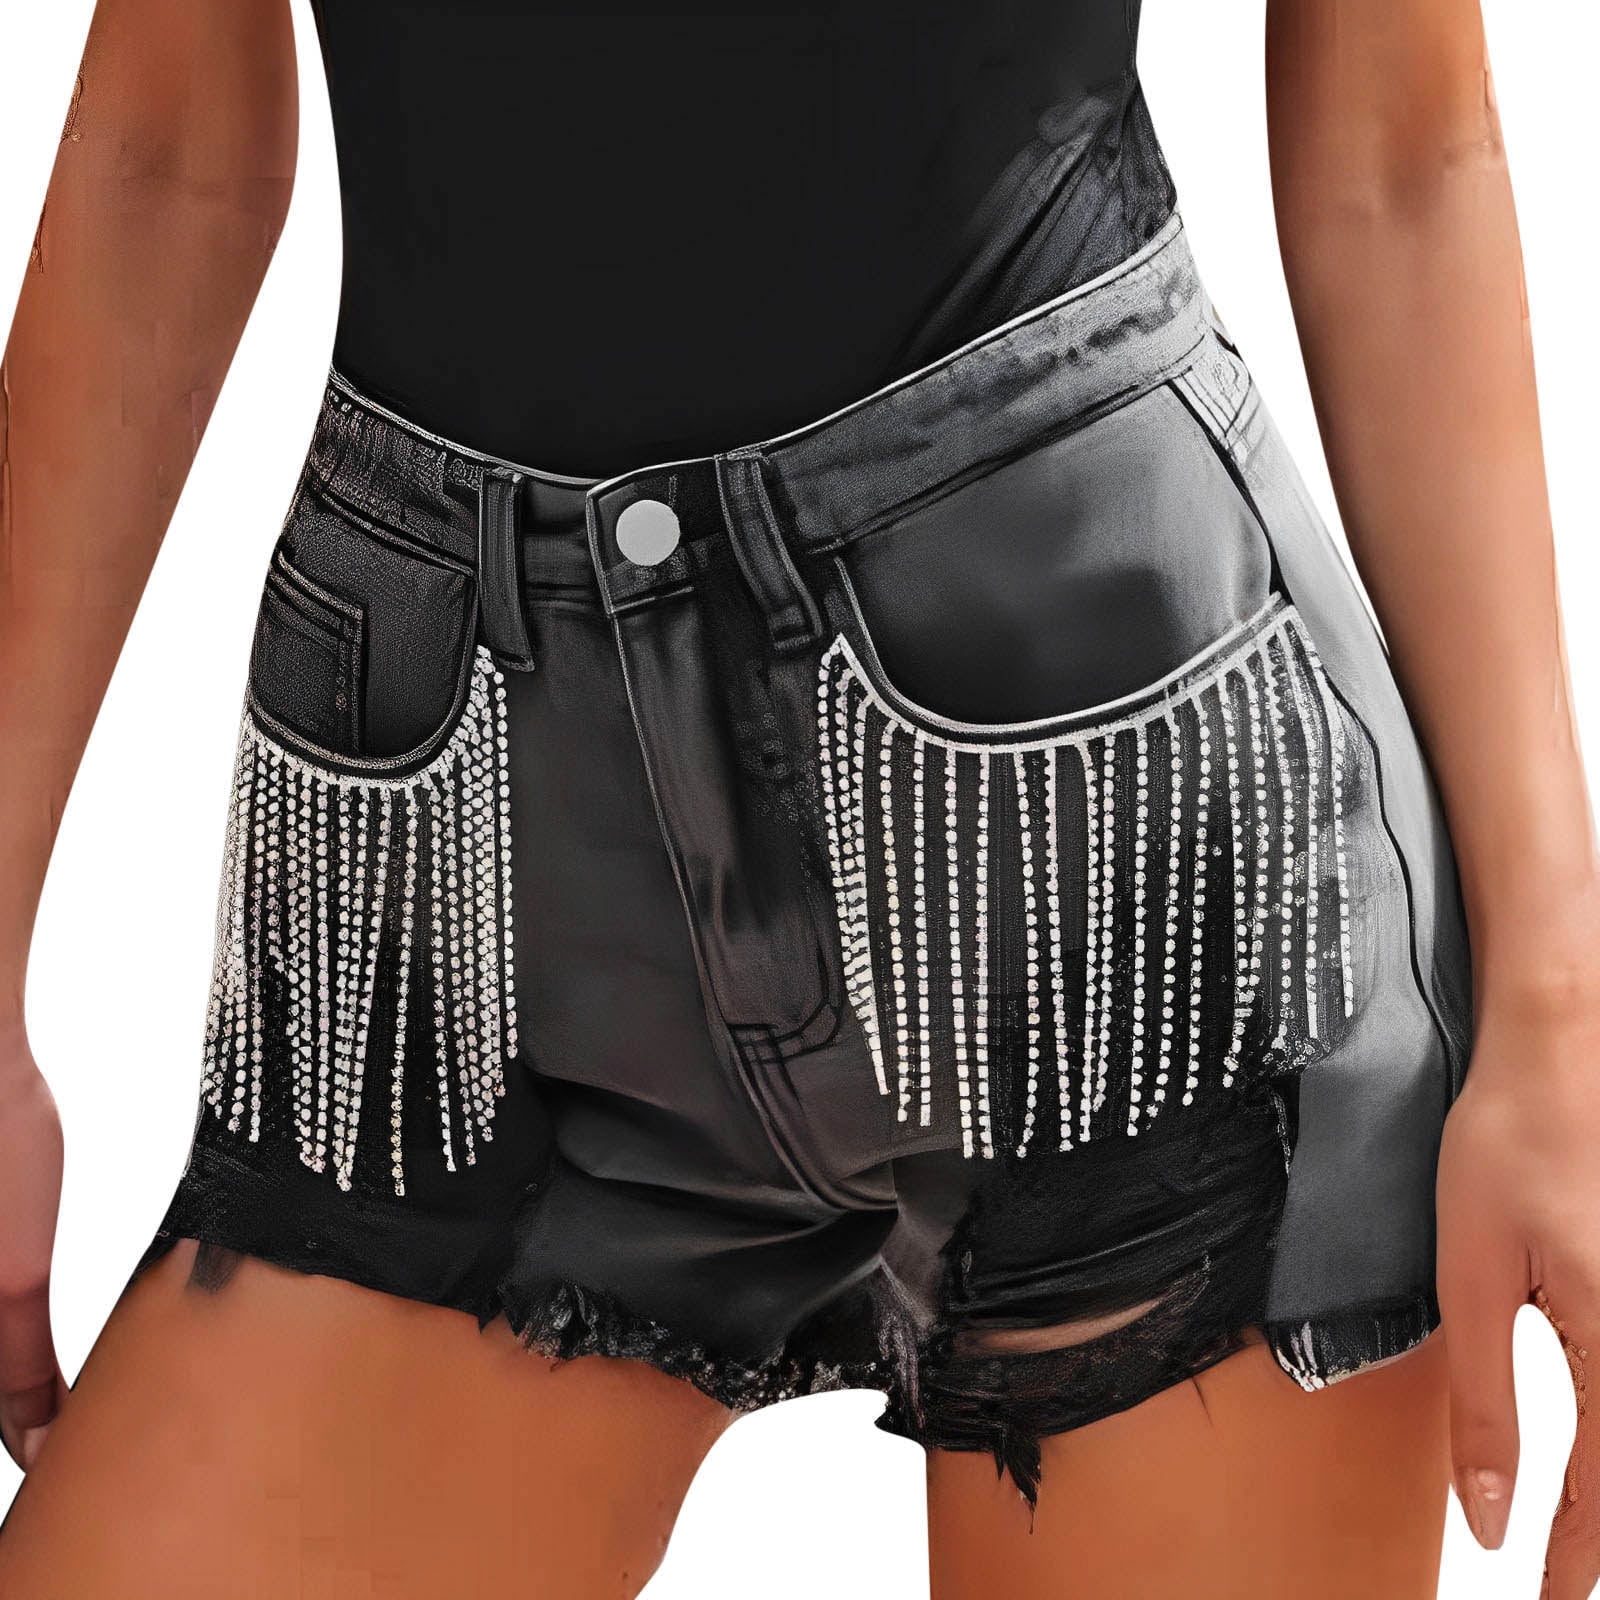  Gamivast Womens Ripped Jean Shorts with Bling Fringe